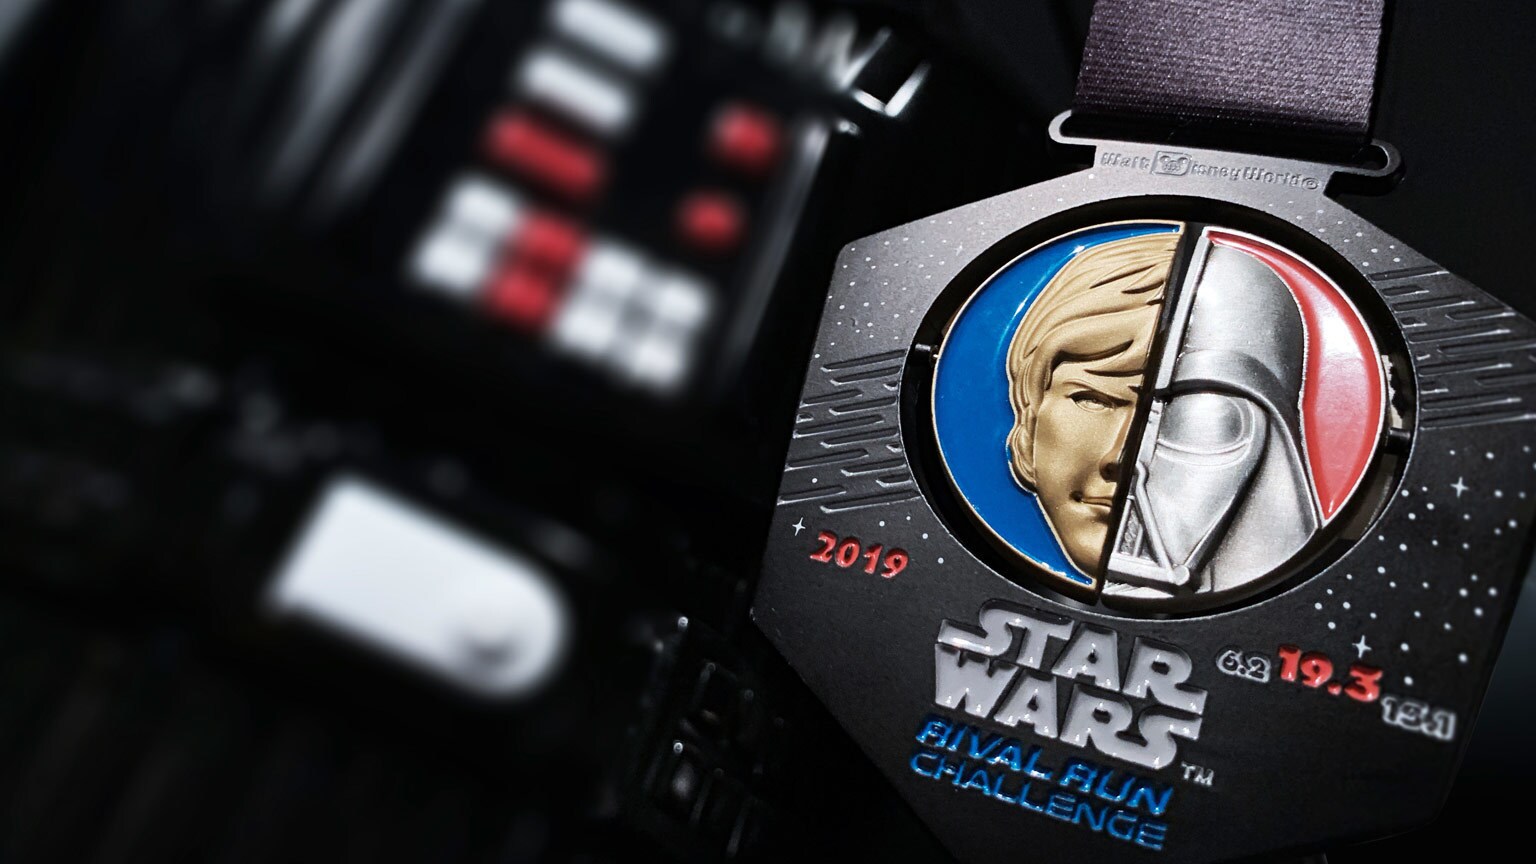 Get Ready for the runDisney Star Wars Rival Run Weekend with StarWars.com's Apple Music Playlist